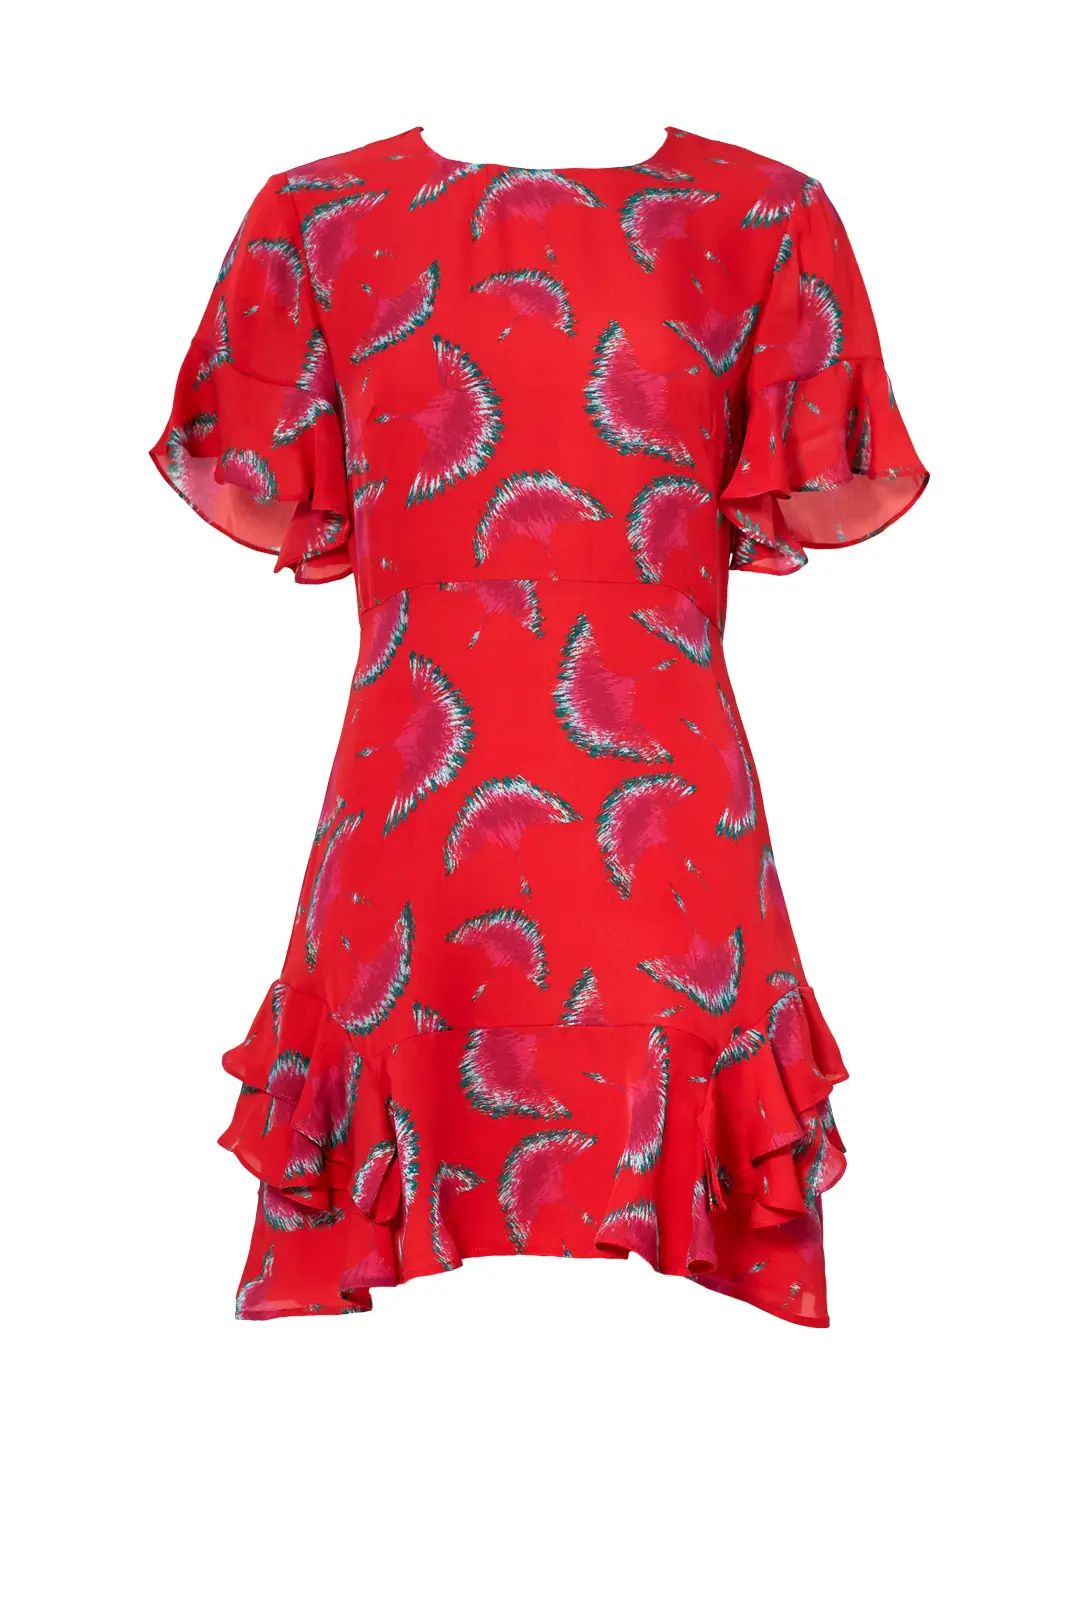 Tanya Taylor Red Printed Lissy Dress | Rent The Runway